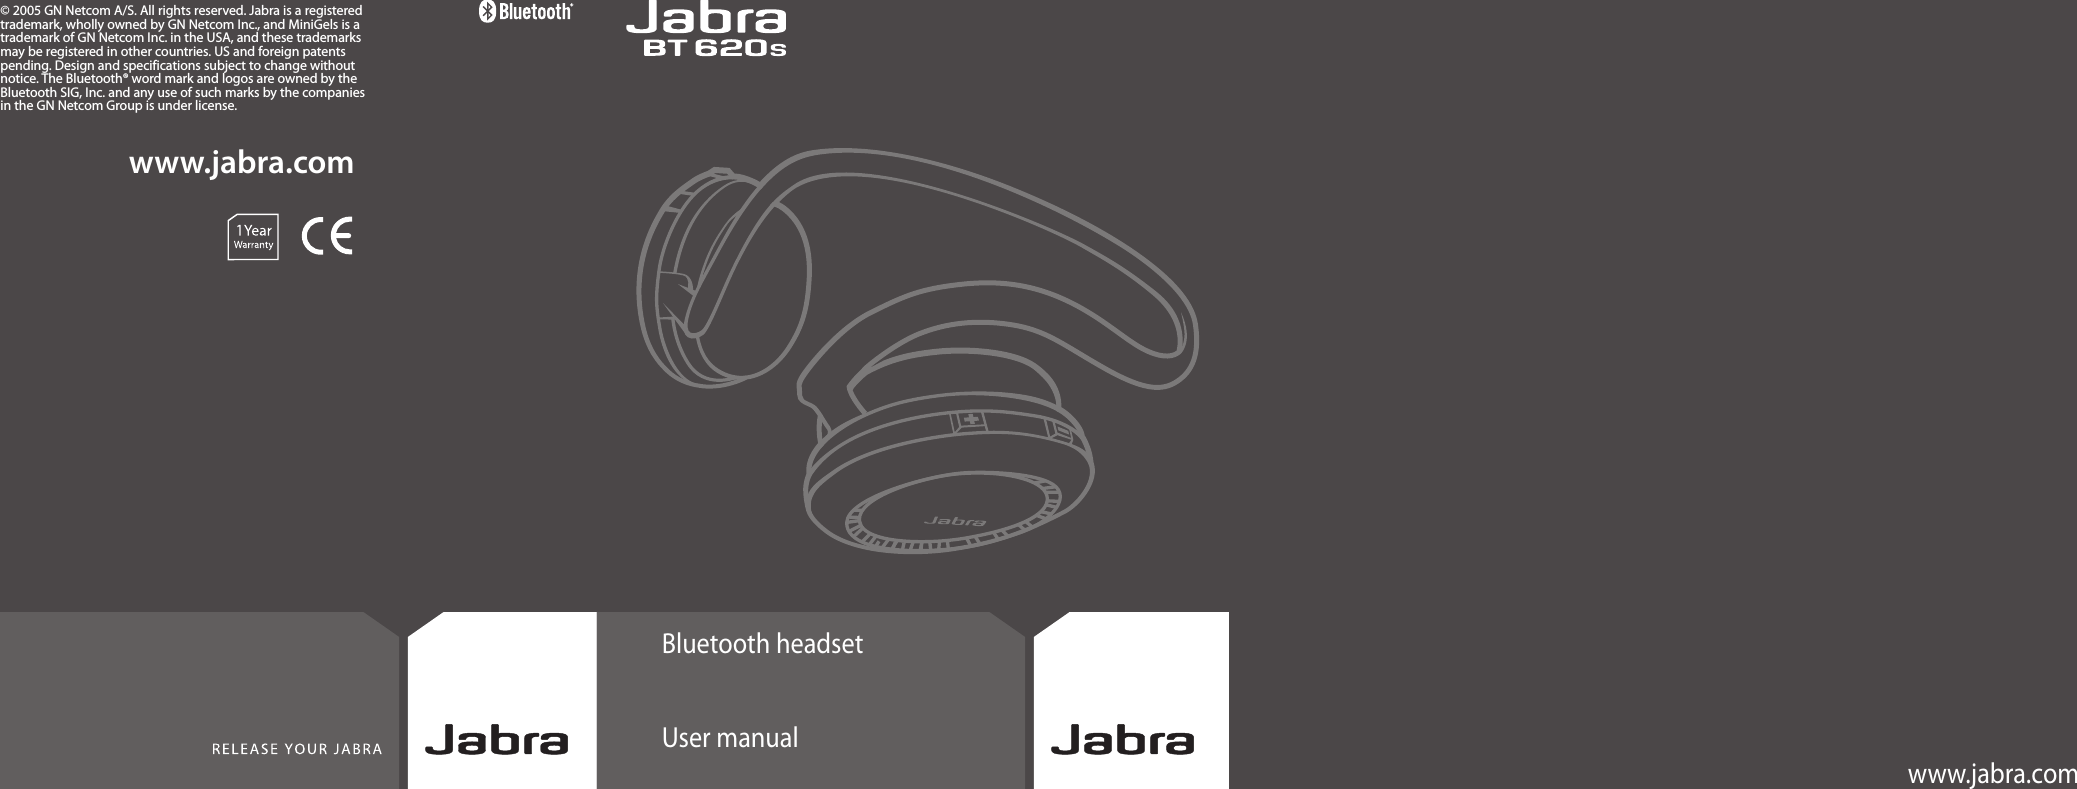 Bluetooth headsetUser manualwww.jabra.comwww.jabra.com© 2005 GN Netcom A/S. All rights reserved. Jabra is a registeredtrademark, wholly owned by GN Netcom Inc., and MiniGels is atrademark of GN Netcom Inc. in the USA, and these trademarksmay be registered in other countries. US and foreign patentspending. Design and specifications subject to change withoutnotice. The Bluetooth® word mark and logos are owned by theBluetooth SIG, Inc. and any use of such marks by the companies in the GN Netcom Group is under license.